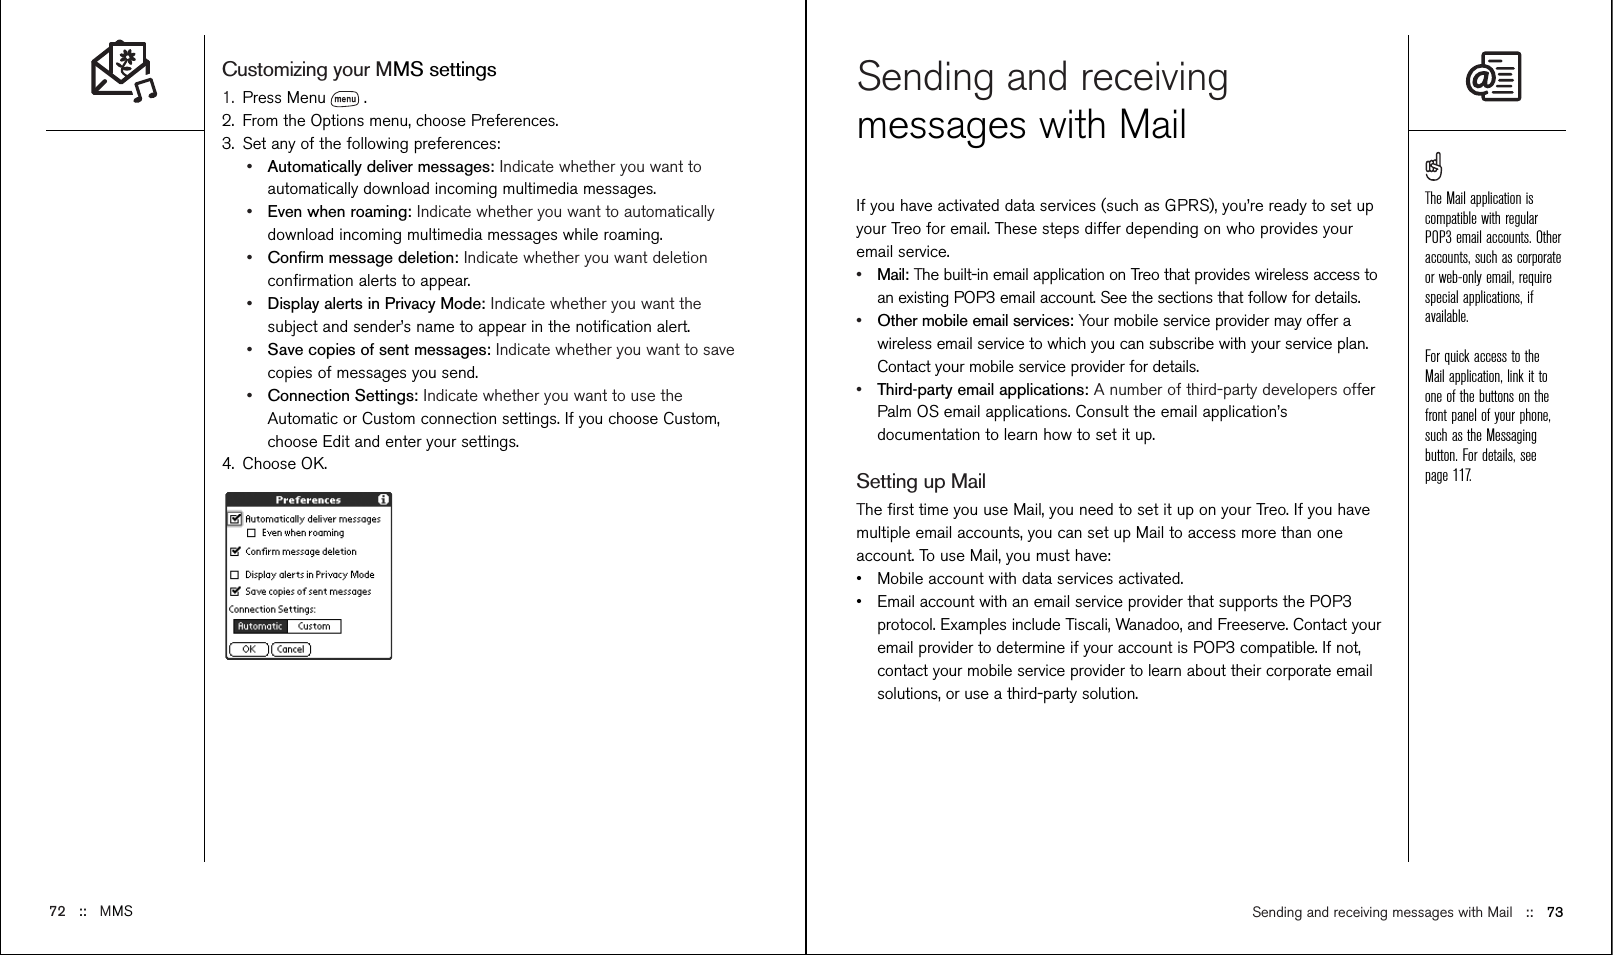 Sending and receiving messages with Mail ::   73Sending and receivingmessages with Mail If you have activated data services (such as GPRS), you’re ready to set upyour Treo for email. These steps differ depending on who provides youremail service.•Mail: The built-in email application on Treo that provides wireless access toan existing POP3 email account. See the sections that follow for details.•Other mobile email services: Your mobile service provider may offer awireless email service to which you can subscribe with your service plan.Contact your mobile service provider for details.•Third-party email applications: A number of third-party developers offerPalm OS email applications. Consult the email application’sdocumentation to learn how to set it up.Setting up MailThe ﬁrst time you use Mail, you need to set it up on your Treo. If you havemultiple email accounts, you can set up Mail to access more than oneaccount. To use Mail, you must have:•Mobile account with data services activated.•Email account with an email service provider that supports the POP3protocol. Examples include Tiscali, Wanadoo, and Freeserve. Contact youremail provider to determine if your account is POP3 compatible. If not,contact your mobile service provider to learn about their corporate emailsolutions, or use a third-party solution.Customizing your MMS settings1. Press Menu .2. From the Options menu, choose Preferences.3. Set any of the following preferences:•Automatically deliver messages: Indicate whether you want toautomatically download incoming multimedia messages.•Even when roaming: Indicate whether you want to automaticallydownload incoming multimedia messages while roaming. •Conﬁrm message deletion: Indicate whether you want deletionconﬁrmation alerts to appear.•Display alerts in Privacy Mode: Indicate whether you want thesubject and sender’s name to appear in the notiﬁcation alert.•Save copies of sent messages: Indicate whether you want to savecopies of messages you send.•Connection Settings: Indicate whether you want to use theAutomatic or Custom connection settings. If you choose Custom,choose Edit and enter your settings.4. Choose OK.72 ::   MMSThe Mail application iscompatible with regularPOP3 email accounts. Otheraccounts, such as corporateor web-only email, requirespecial applications, ifavailable.For quick access to theMail application, link it toone of the buttons on thefront panel of your phone,such as the Messagingbutton. For details, seepage 117.